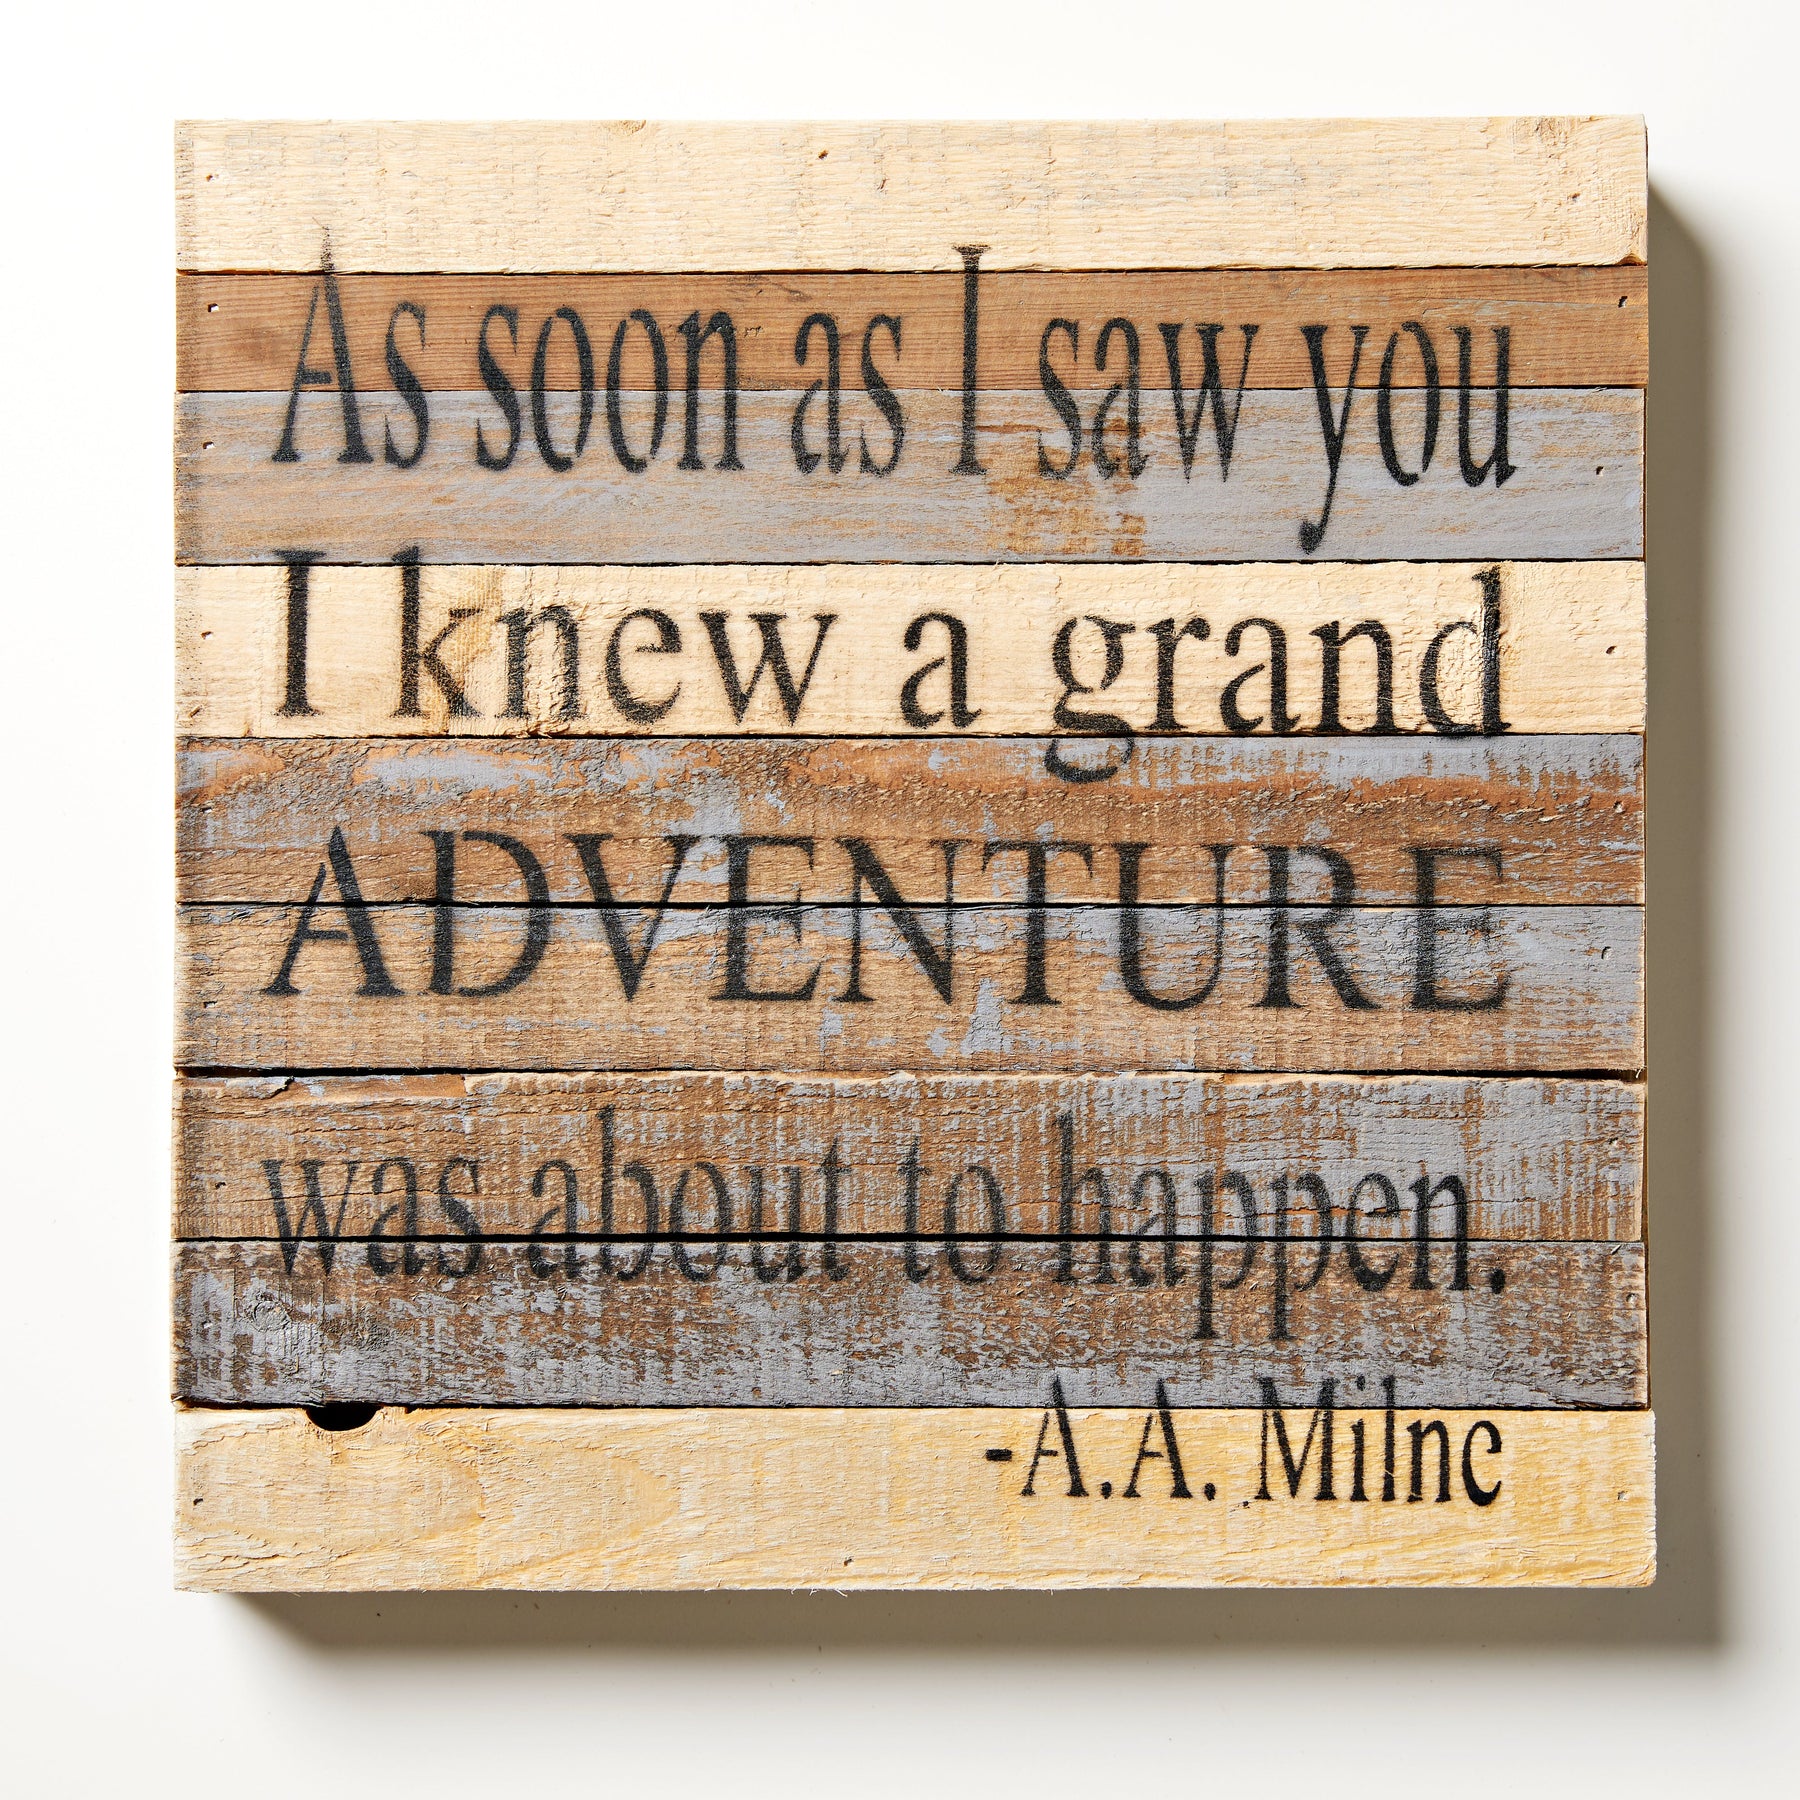 As soon as I saw you I knew a grand adventure was about to happen - A.A. Milne / 12x12 Reclaimed Wood Wall Art